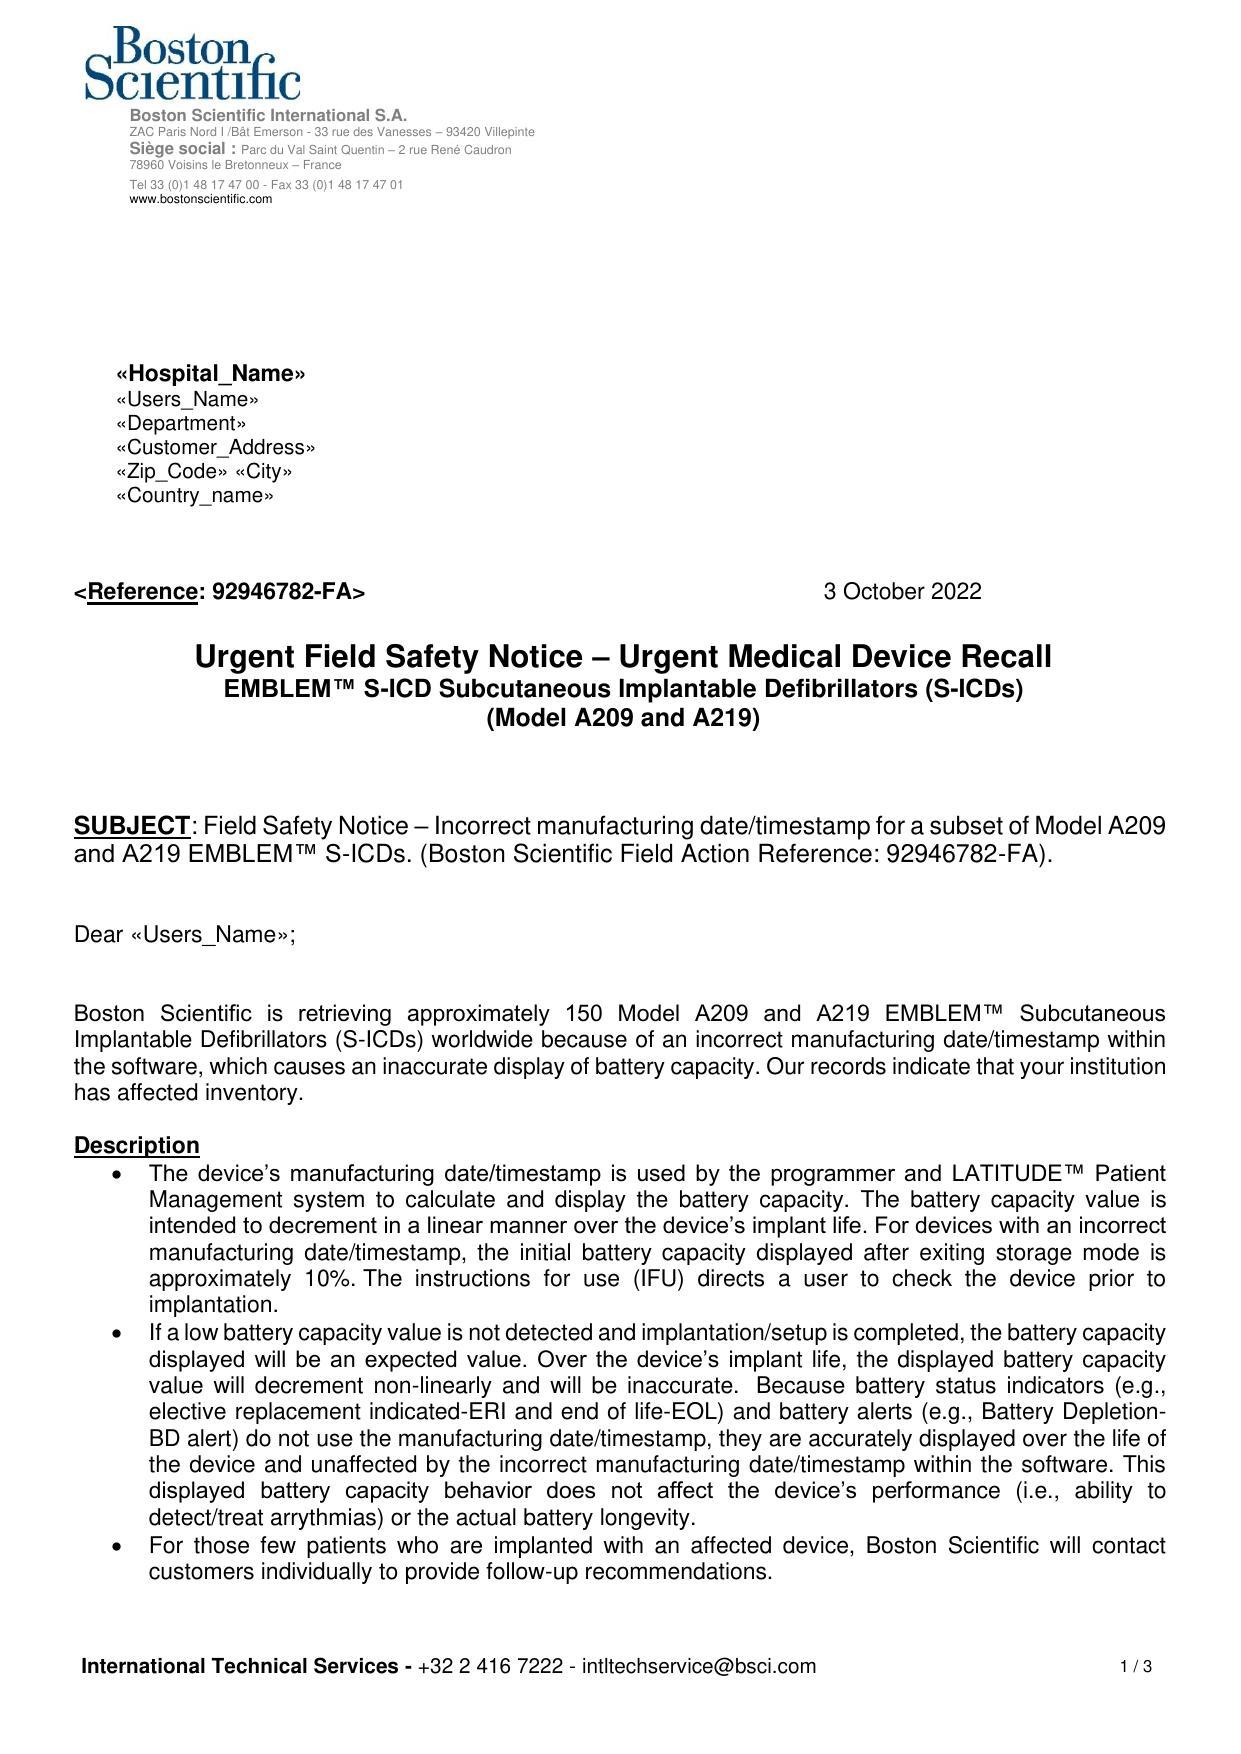 urgent-medical-device-recall-emblemtm-s-icd-subcutaneous-implantable-defibrillators-s-icds-model-a209-and-a219.pdf